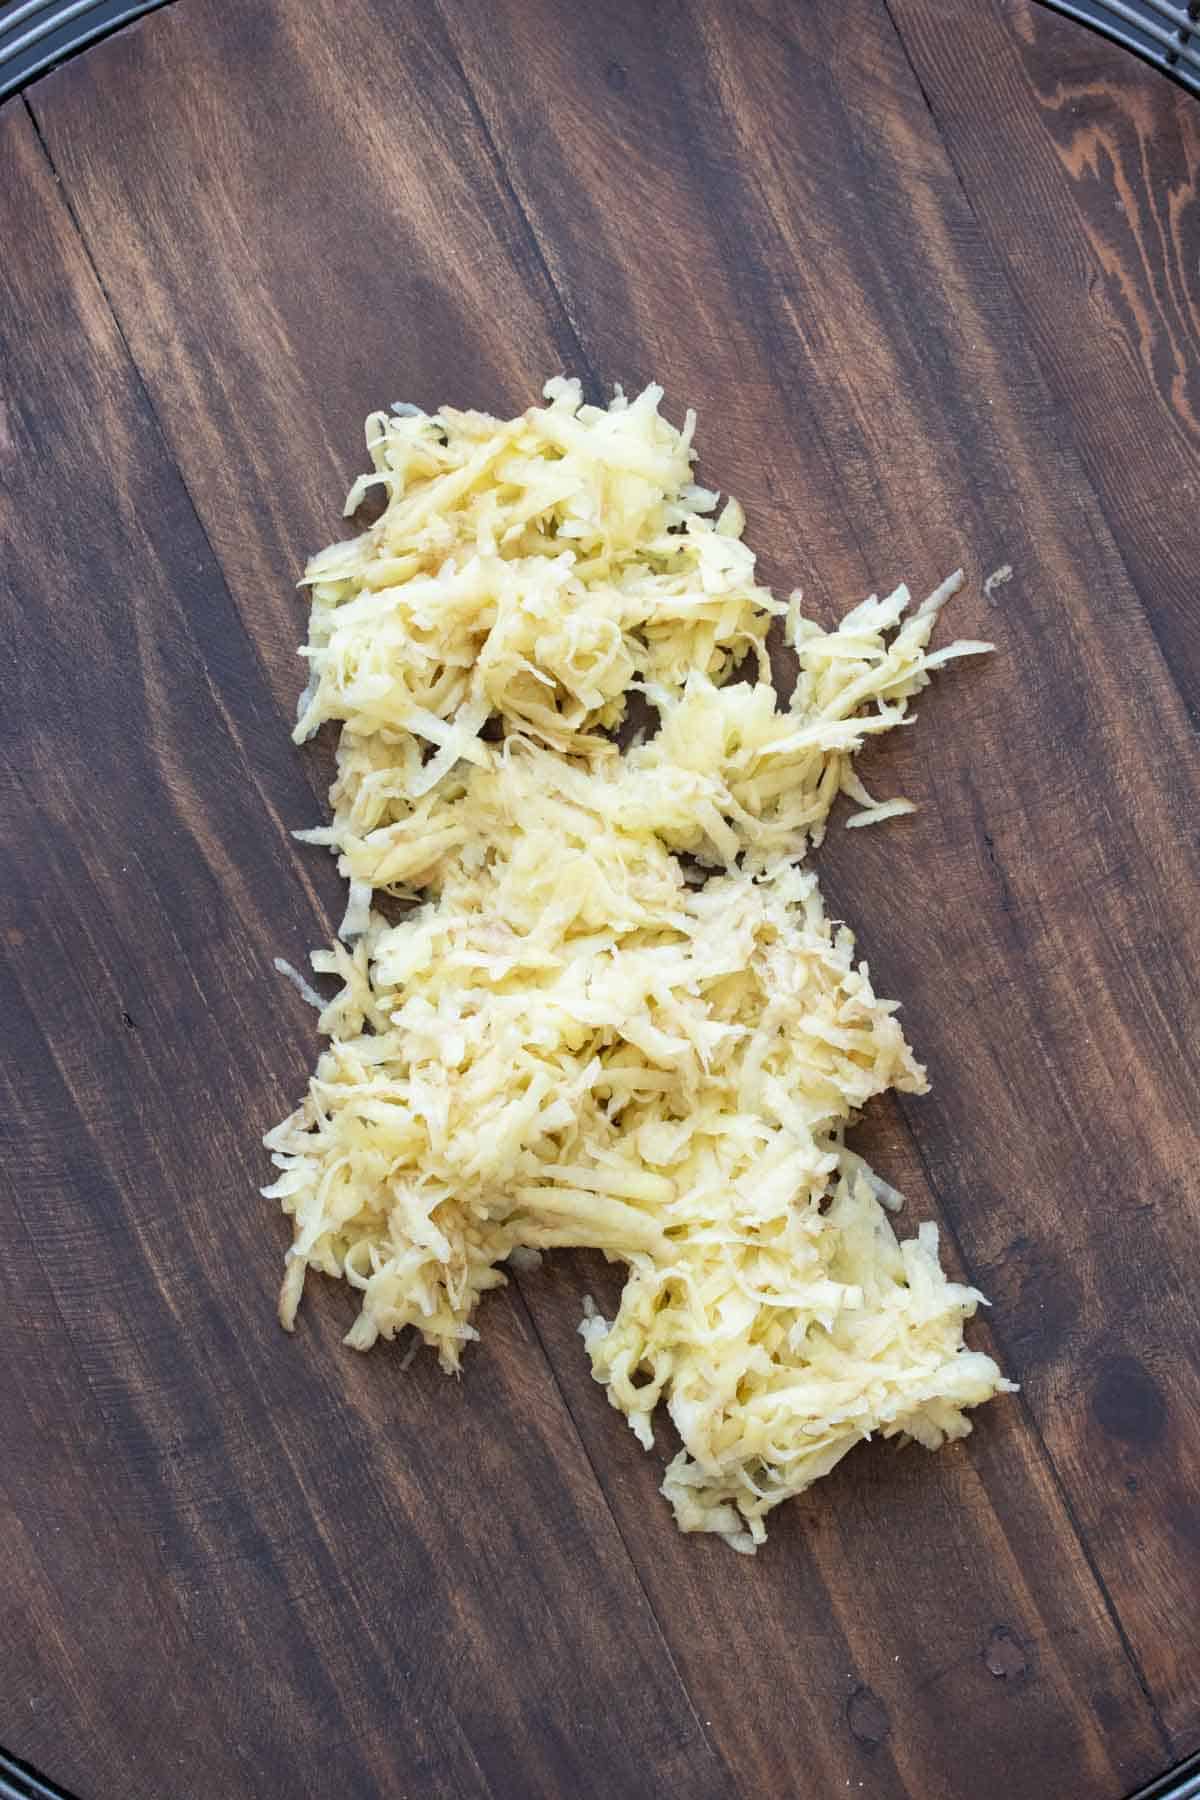 Shredded raw potato pile on a wooden table